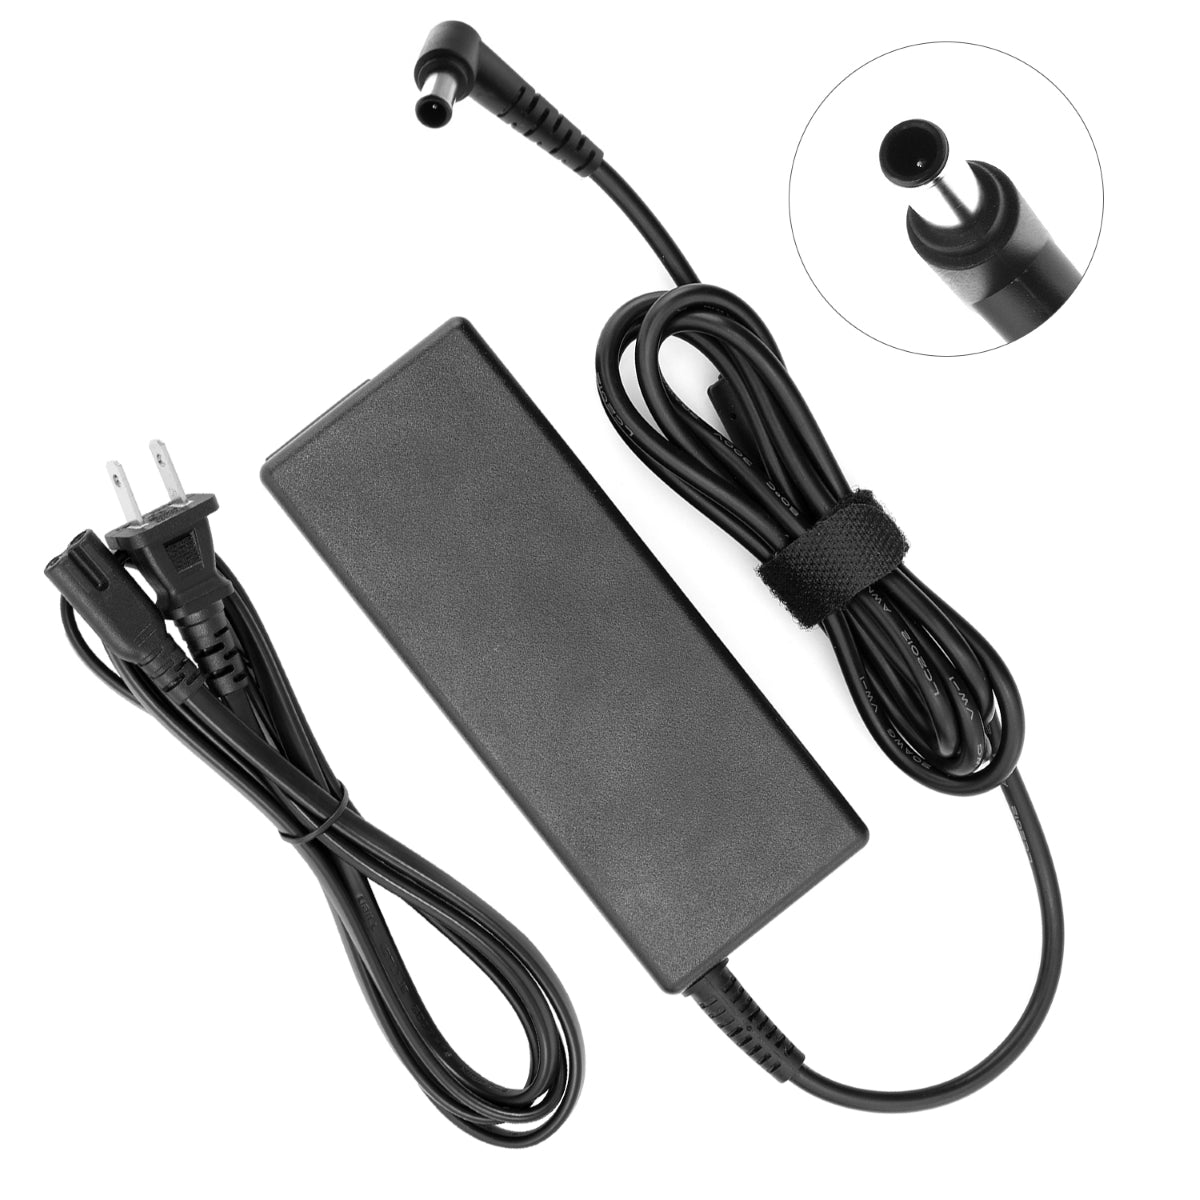 AC Adapter Power Supply for Samsung LS27E330 Monitor